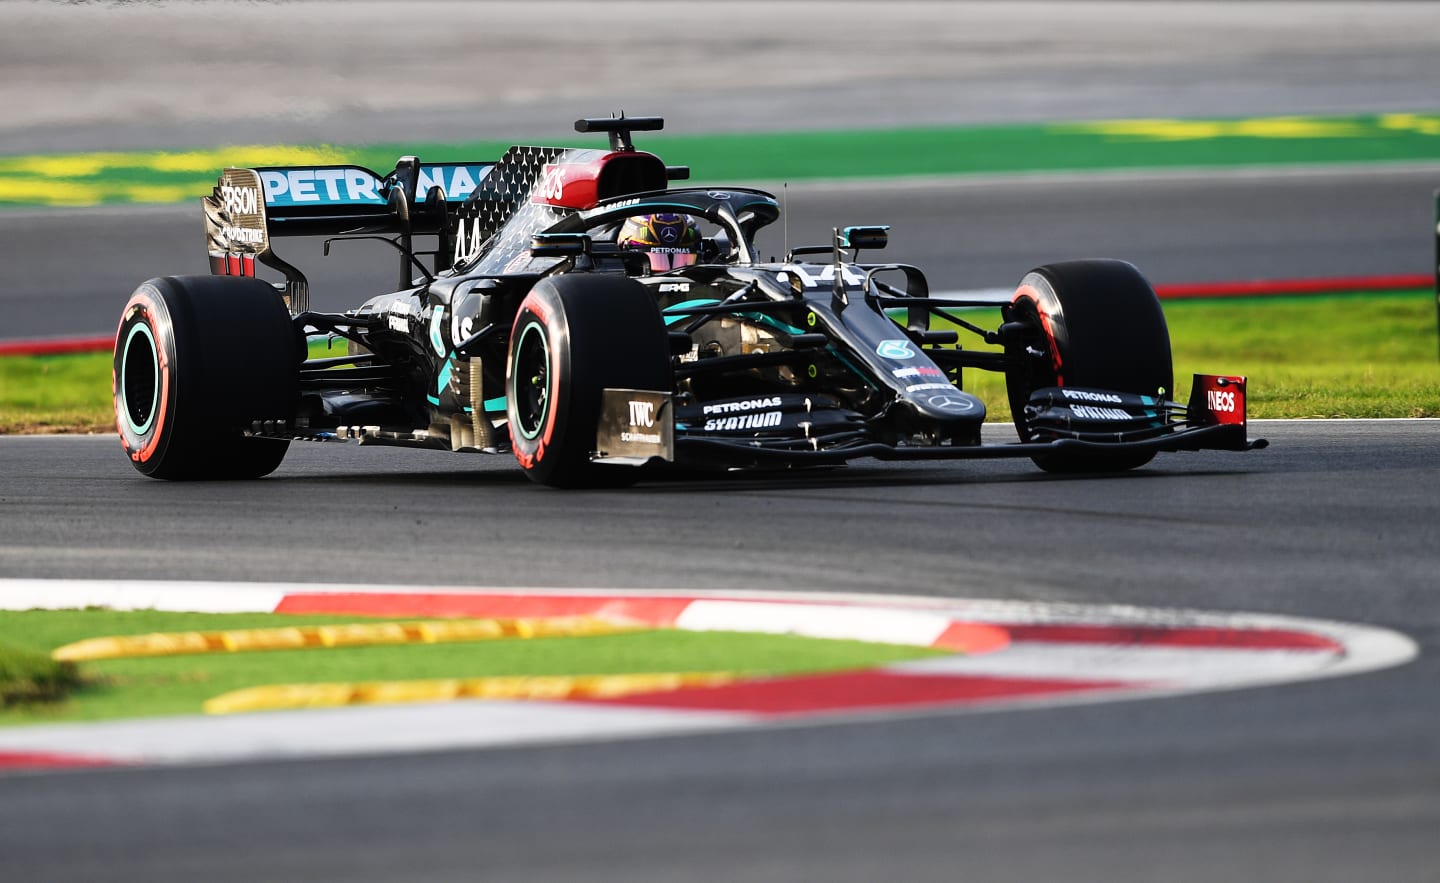 ISTANBUL, TURKEY - NOVEMBER 13: Lewis Hamilton of Great Britain driving the (44) Mercedes AMG Petronas F1 Team Mercedes W11 on track during practice ahead of the F1 Grand Prix of Turkey at Intercity Istanbul Park on November 13, 2020 in Istanbul, Turkey. (Photo by Ozan Kose-Pool/Getty Images)